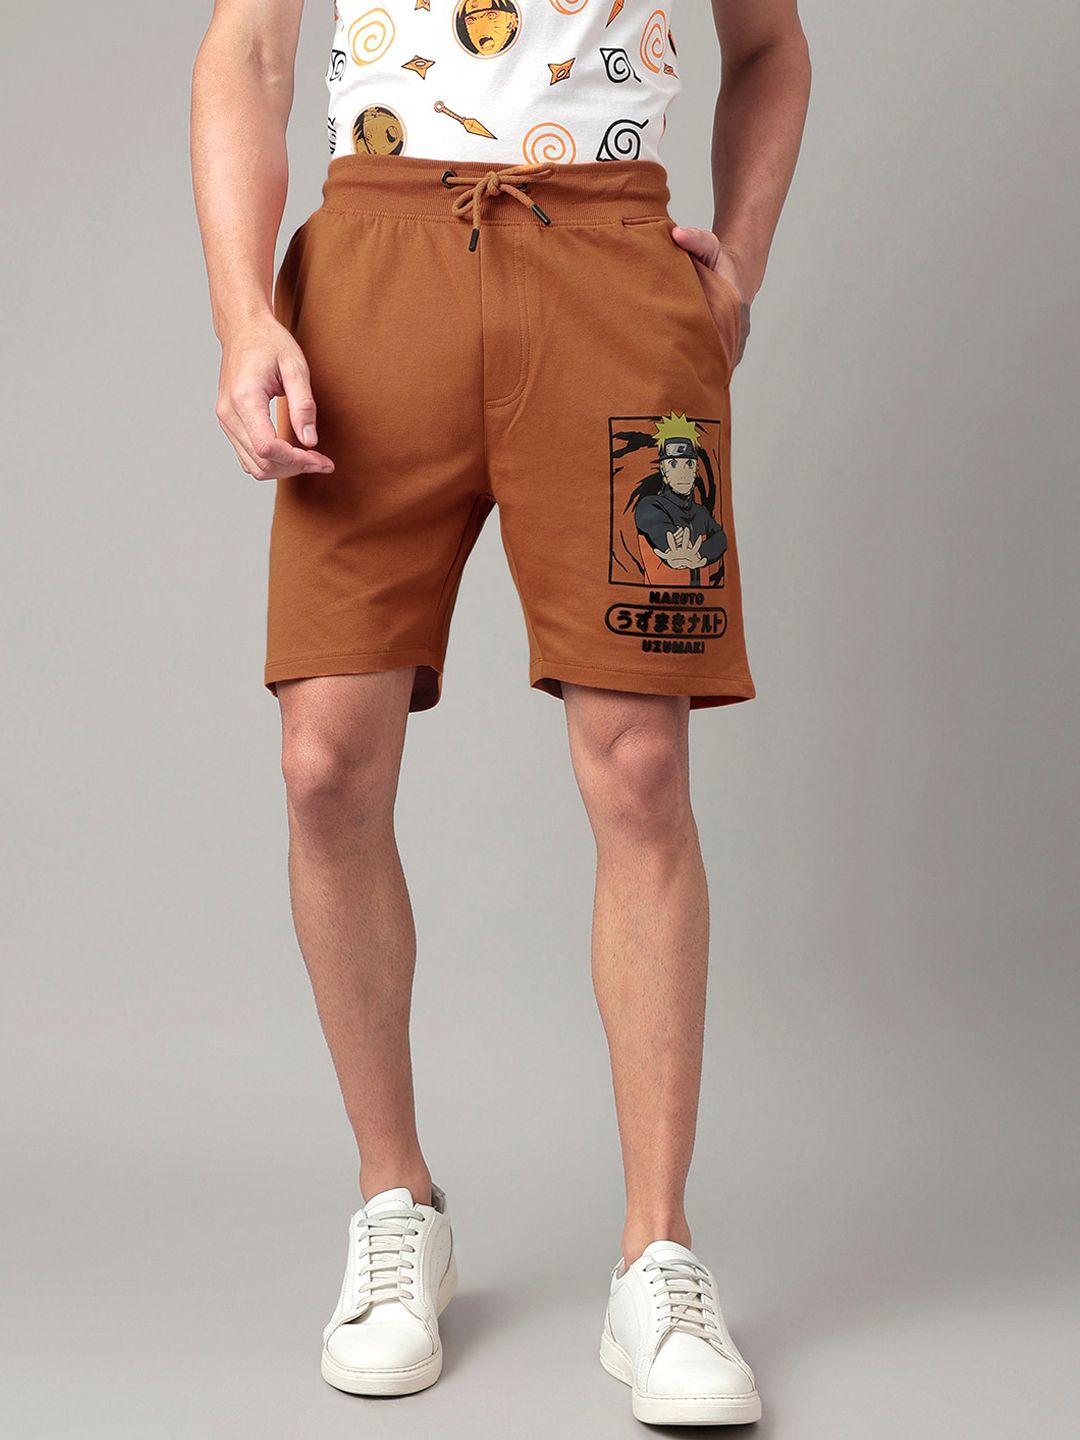 free-authority-new-naruto-printed-thai-curry-shorts